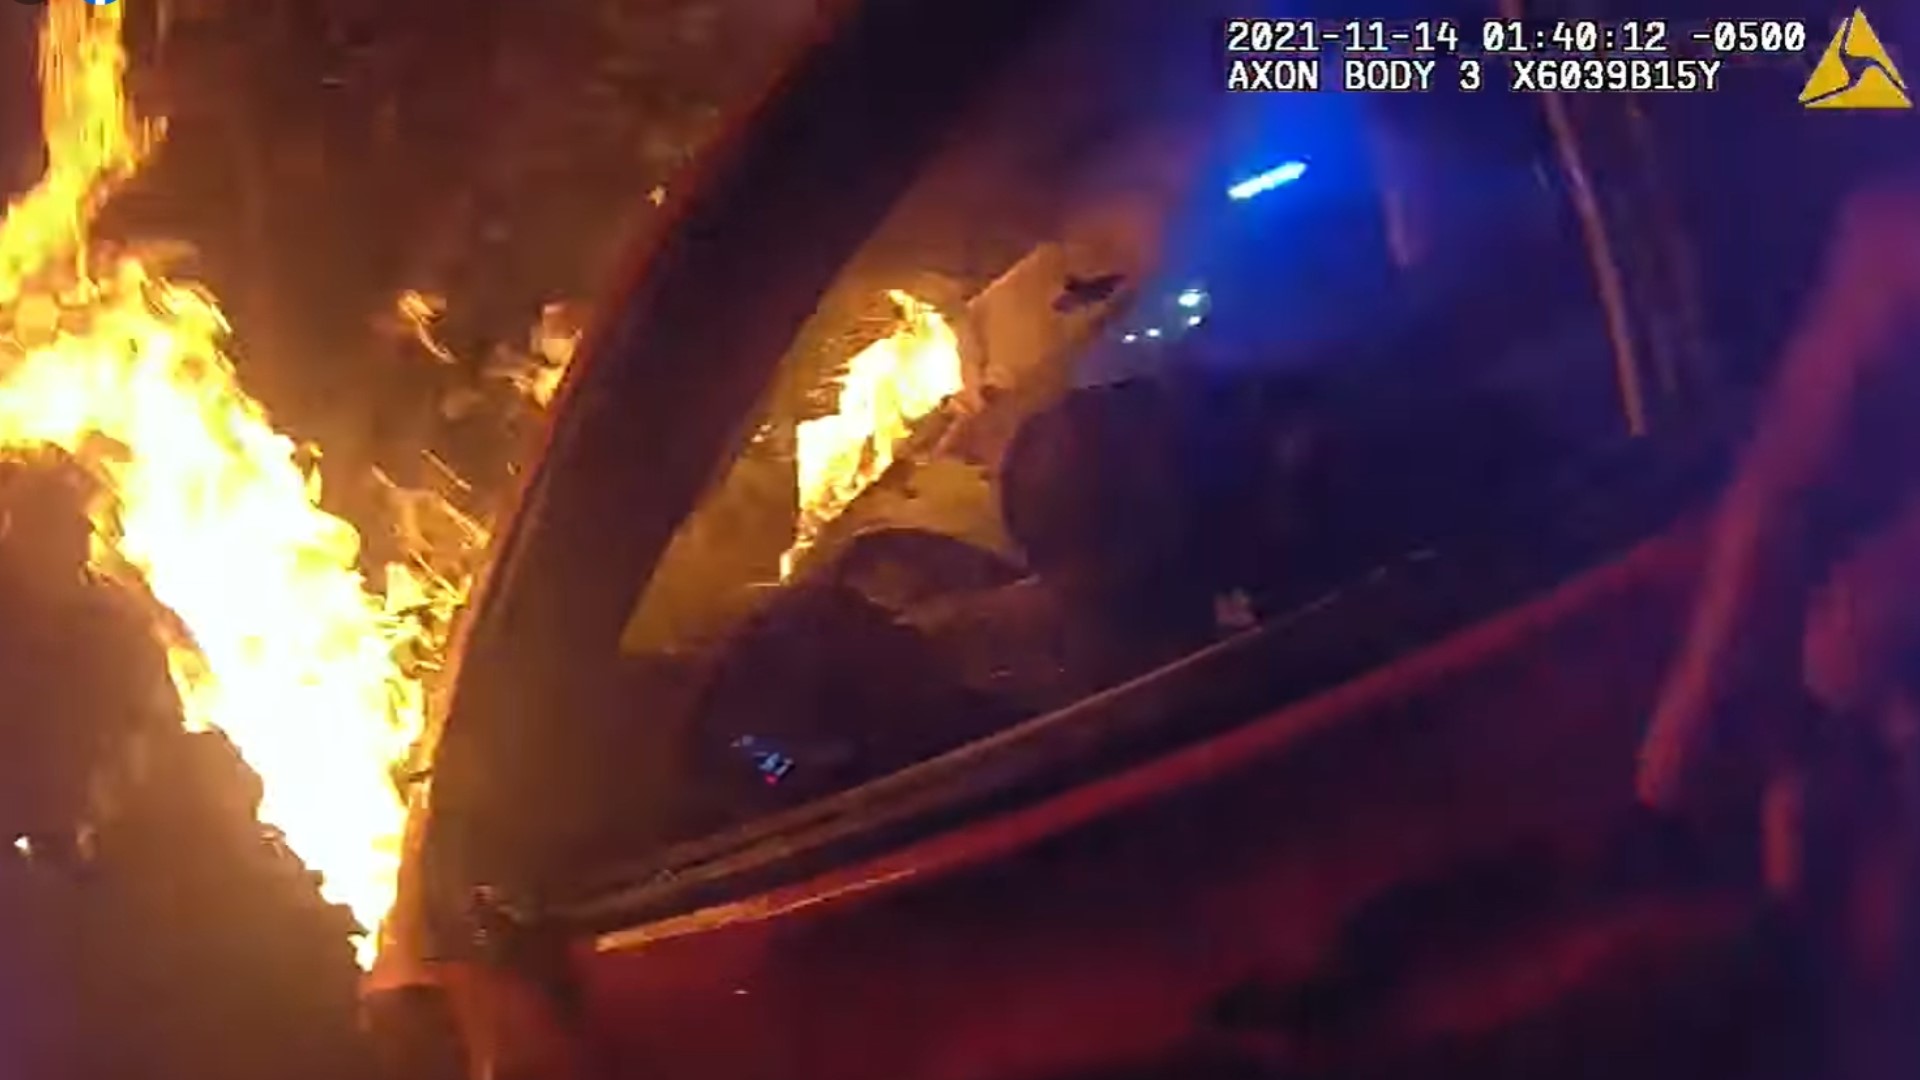 The officers rushed to help a man trapped inside his burning car early Sunday morning.